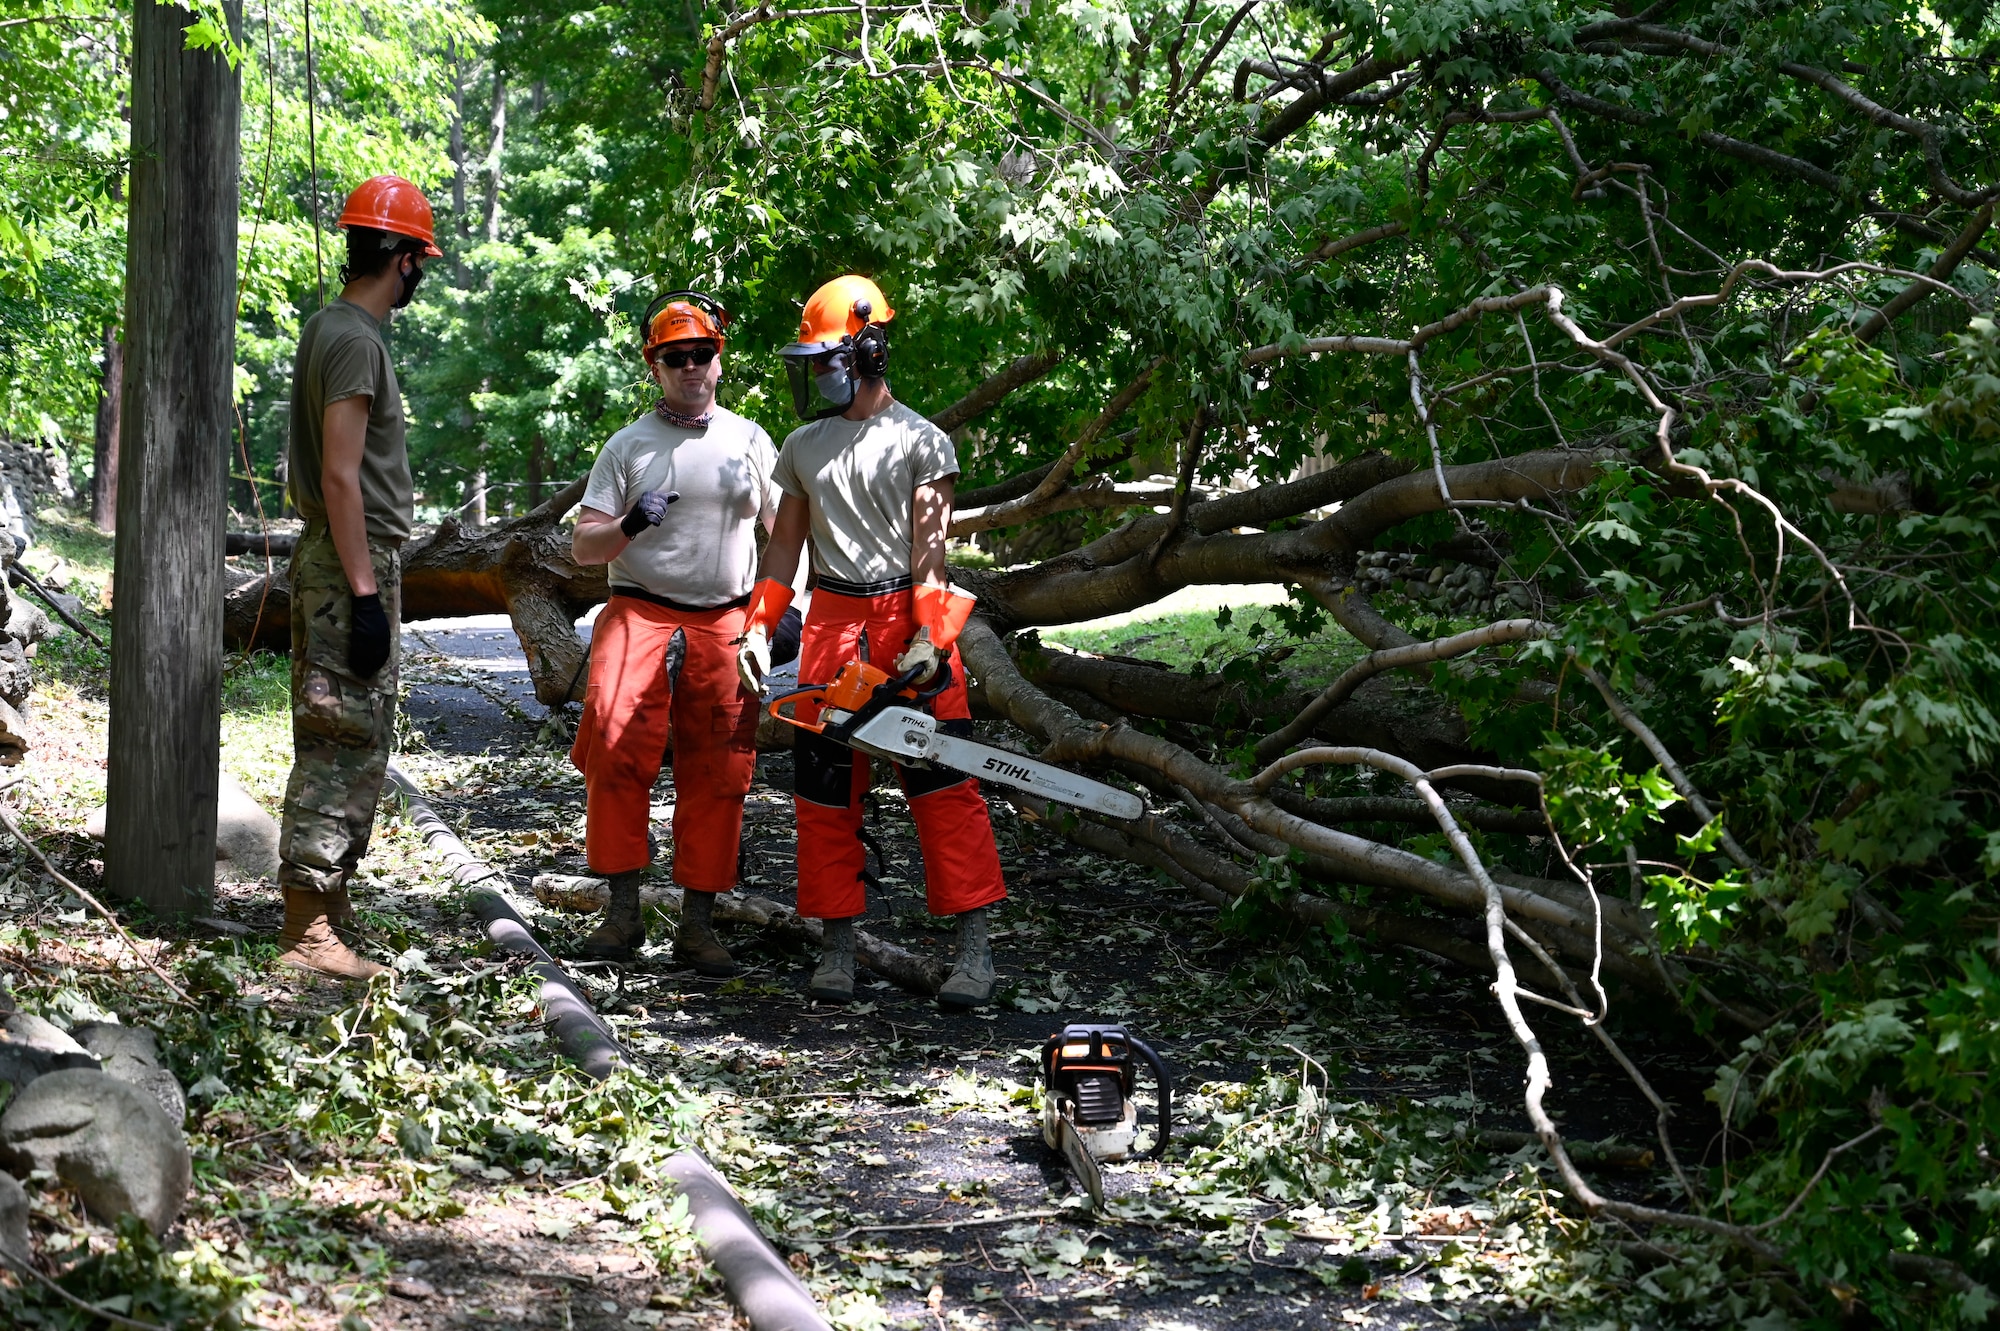 Members of the 103rd Civil Engineer Squadron prepare to cut and remove a tree that fell into a roadway during Hurricane Isaias, August 7, 2020, Fairfield, Connecticut. Members of the 103rd CES removed fallen trees and other debris  from roadways as part of Connecticut's emergency response to Isaias. (U.S. Air National Guard photo by Tech. Sgt. Tamara R. Dabney)